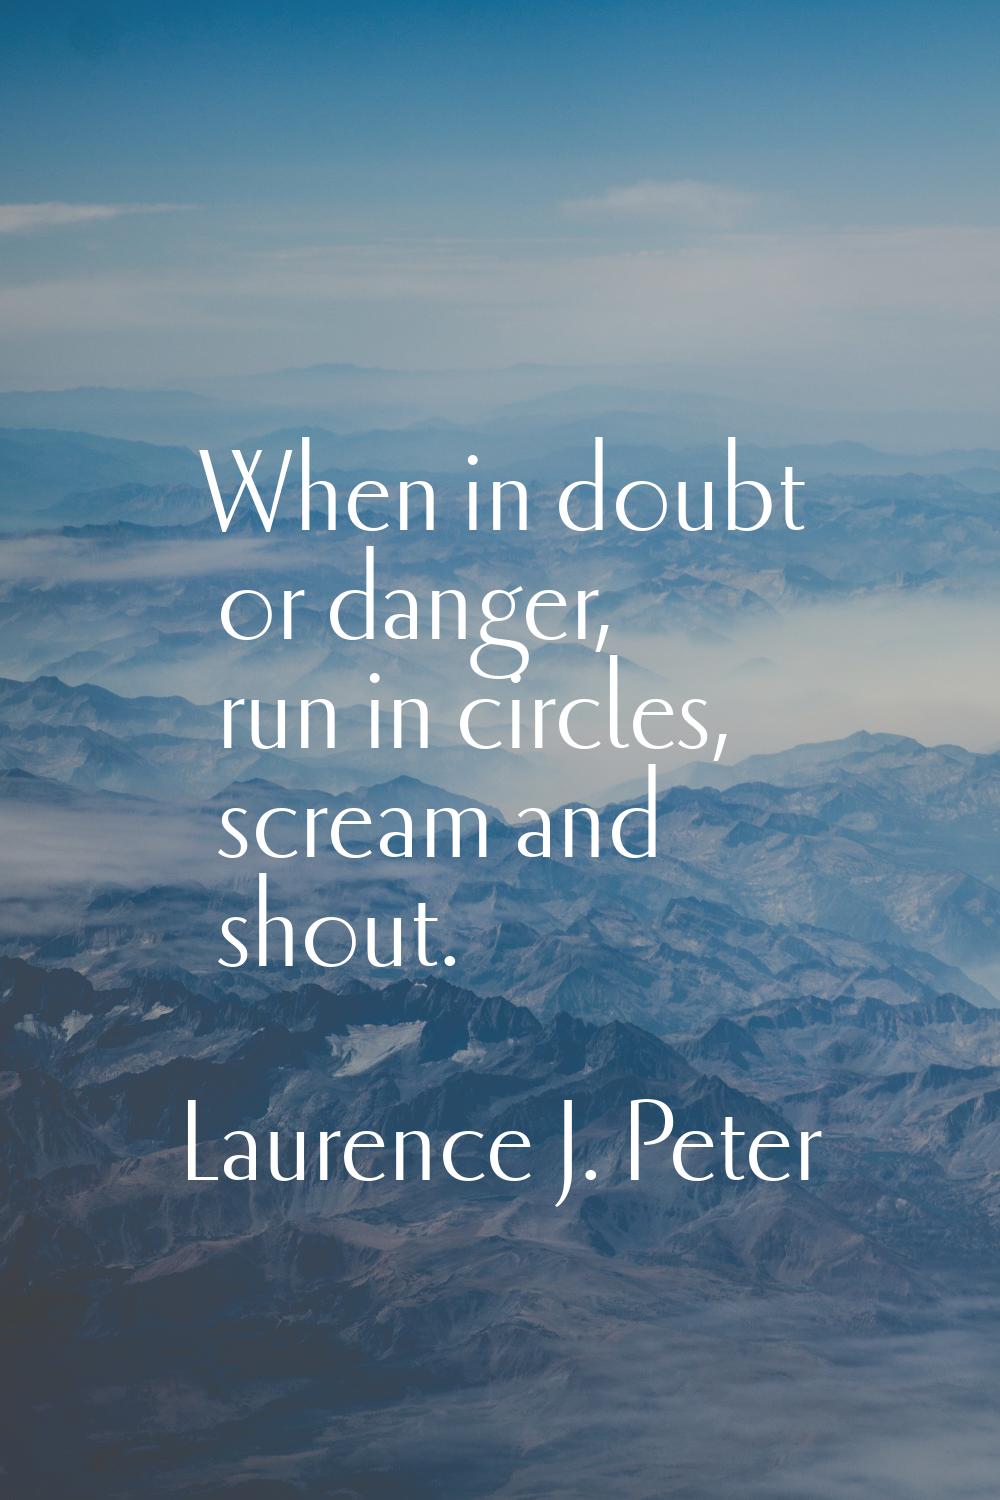 When in doubt or danger, run in circles, scream and shout.